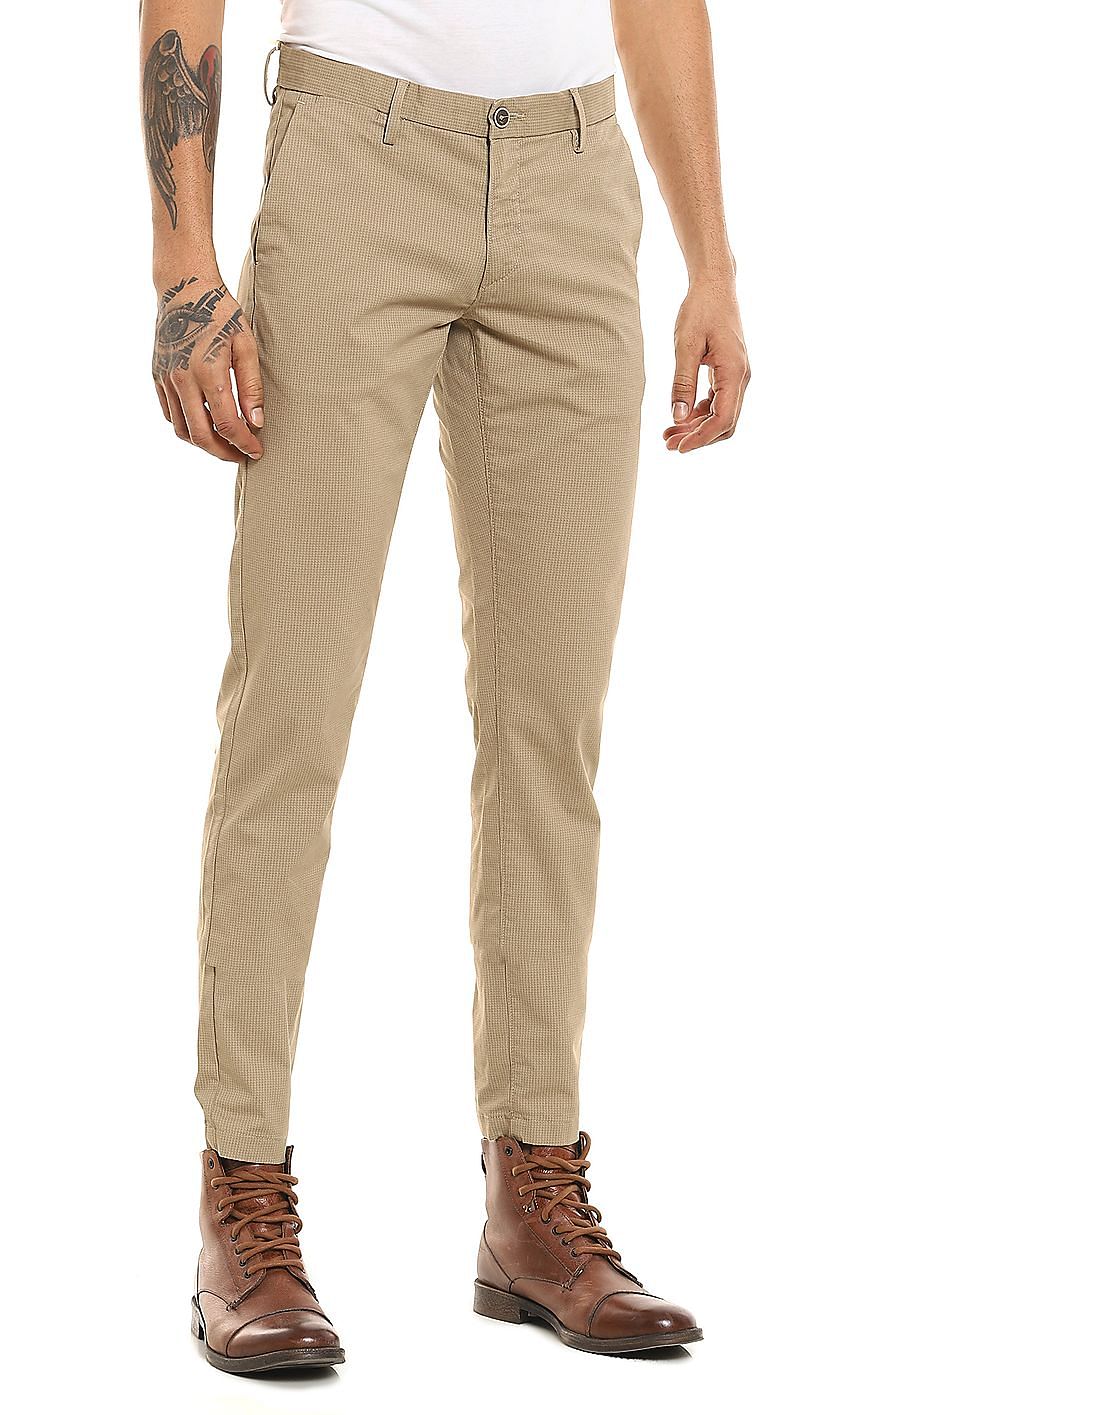 Buy U.S. Polo Assn. Flat Front Patterned Casual Trousers - NNNOW.com